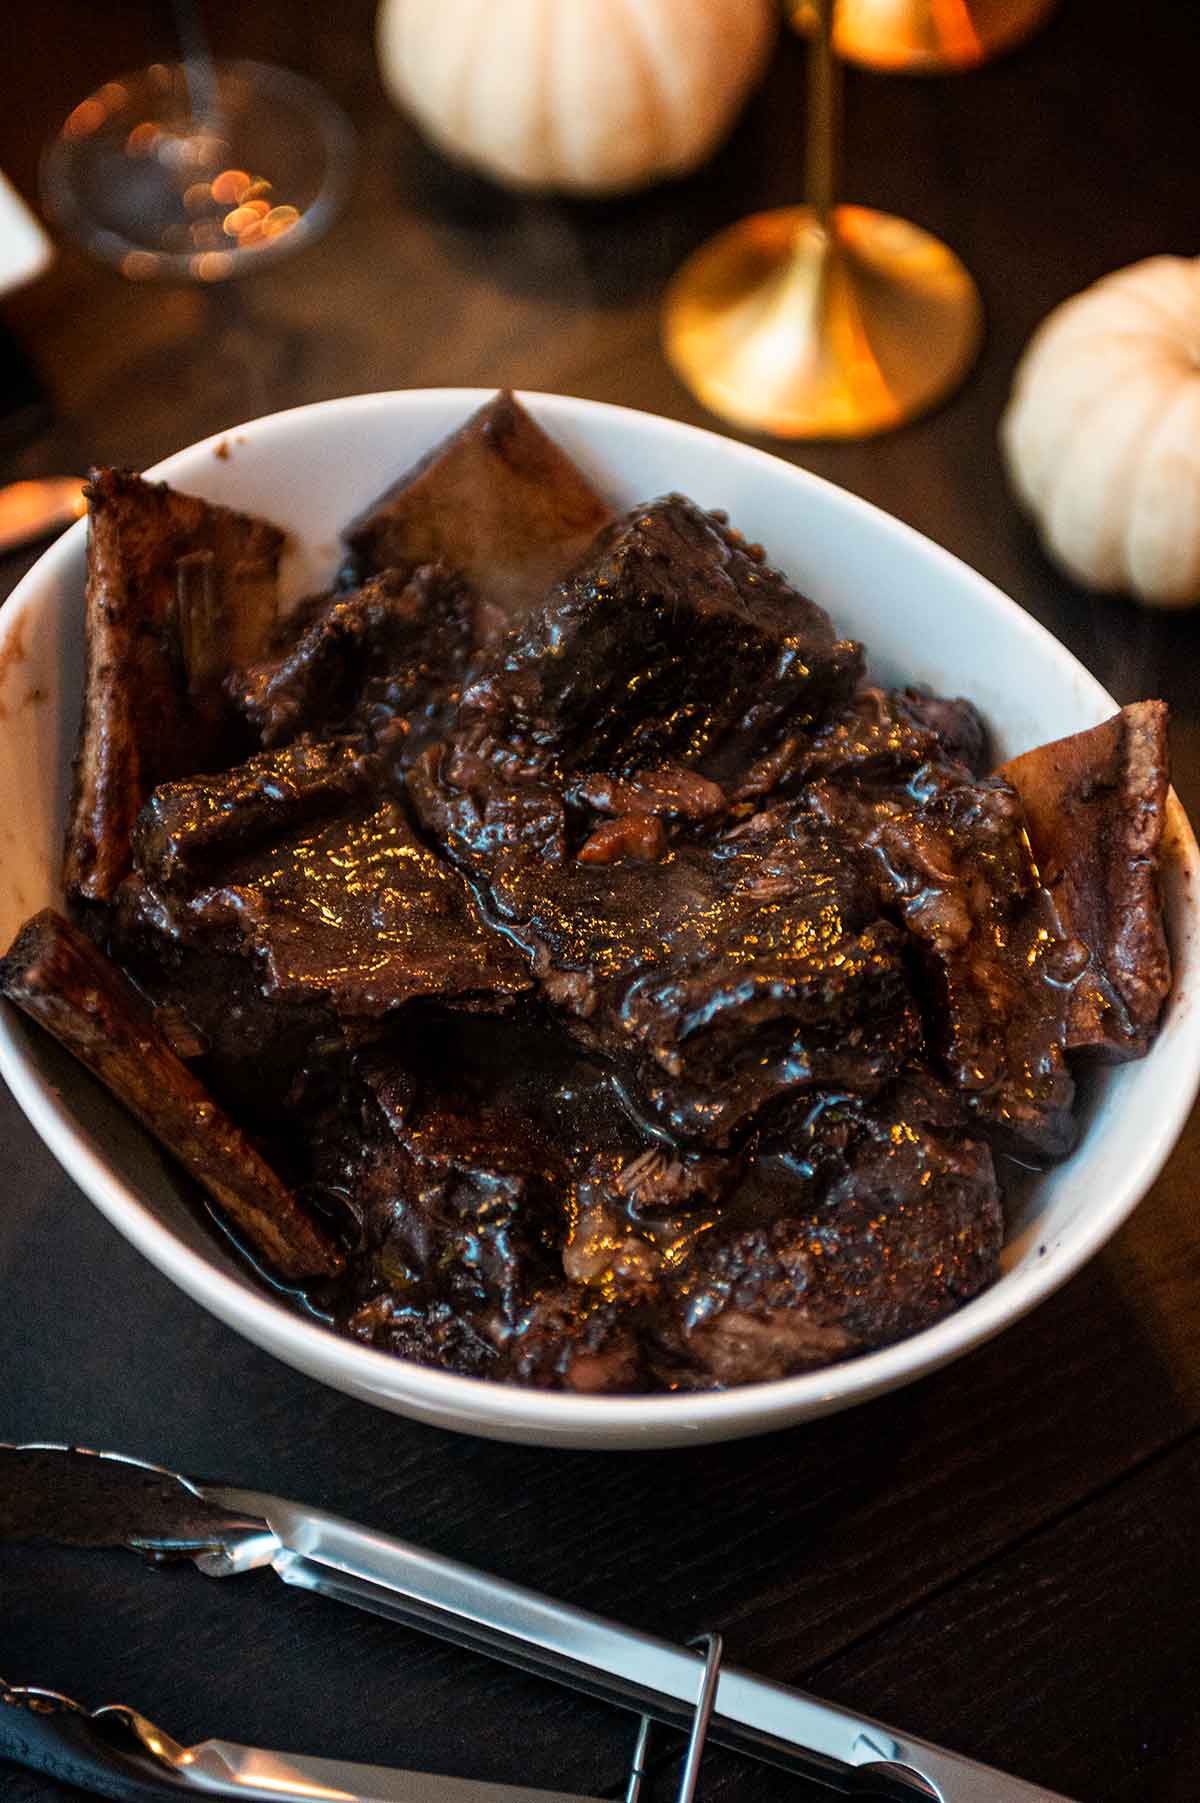 A bowl of braised short ribs on a table.